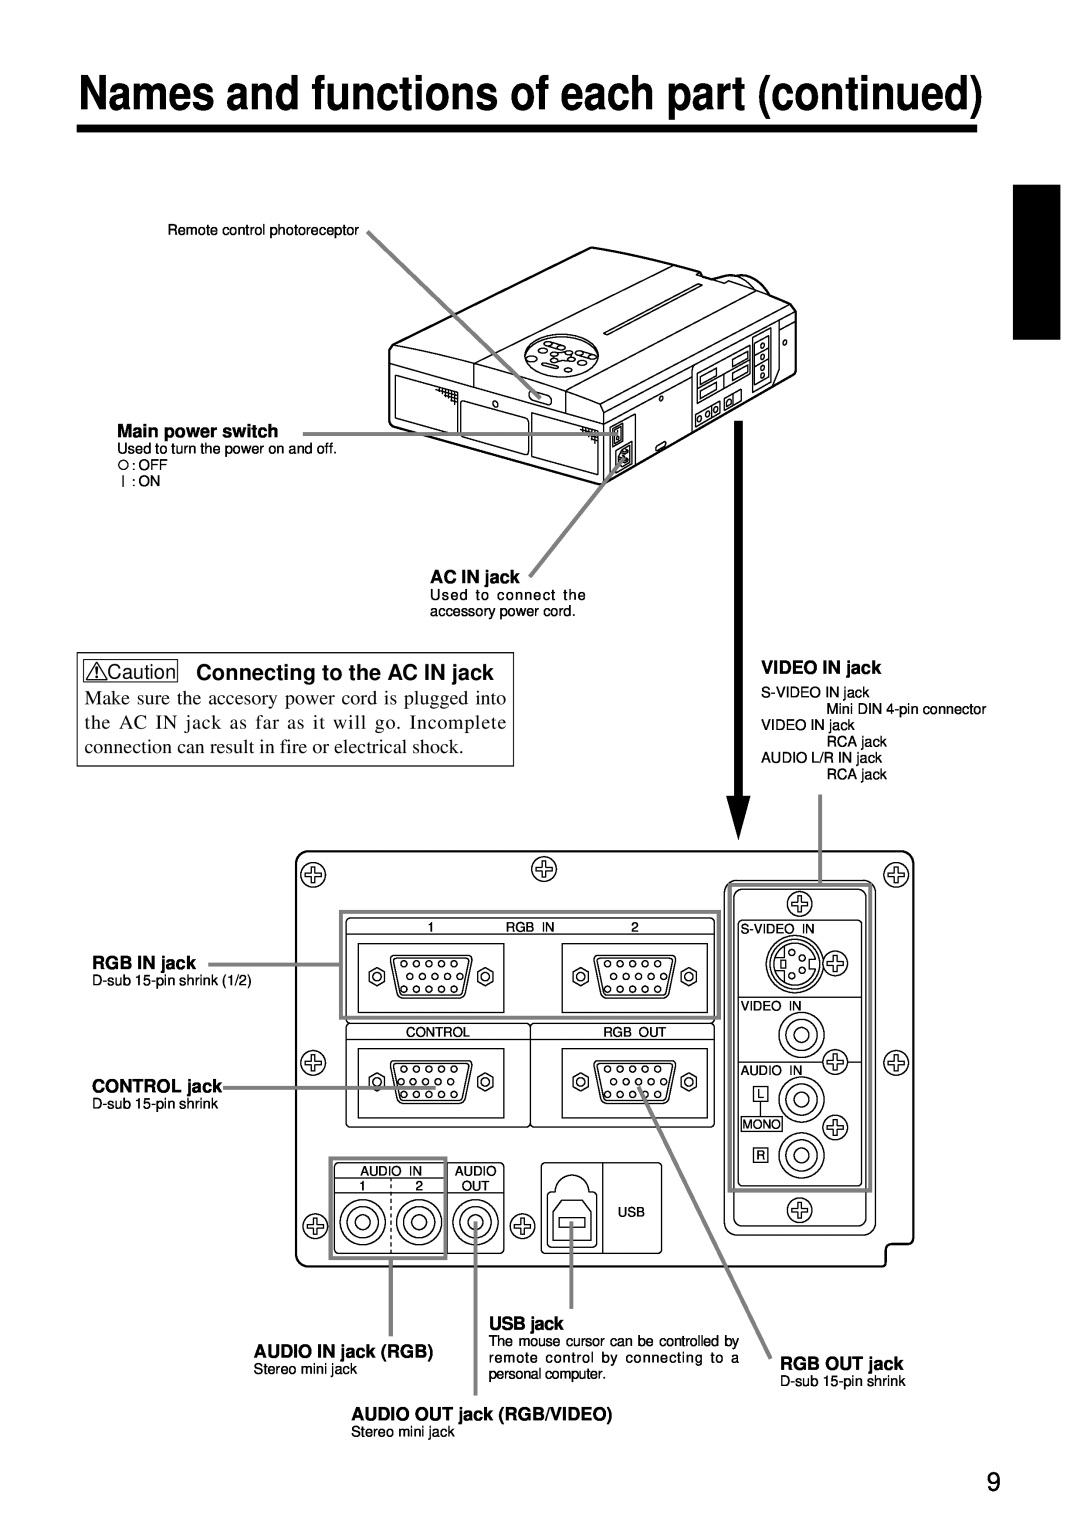 Hitachi CP-X960W user manual Names and functions of each part continued, Caution Connecting to the AC IN jack 